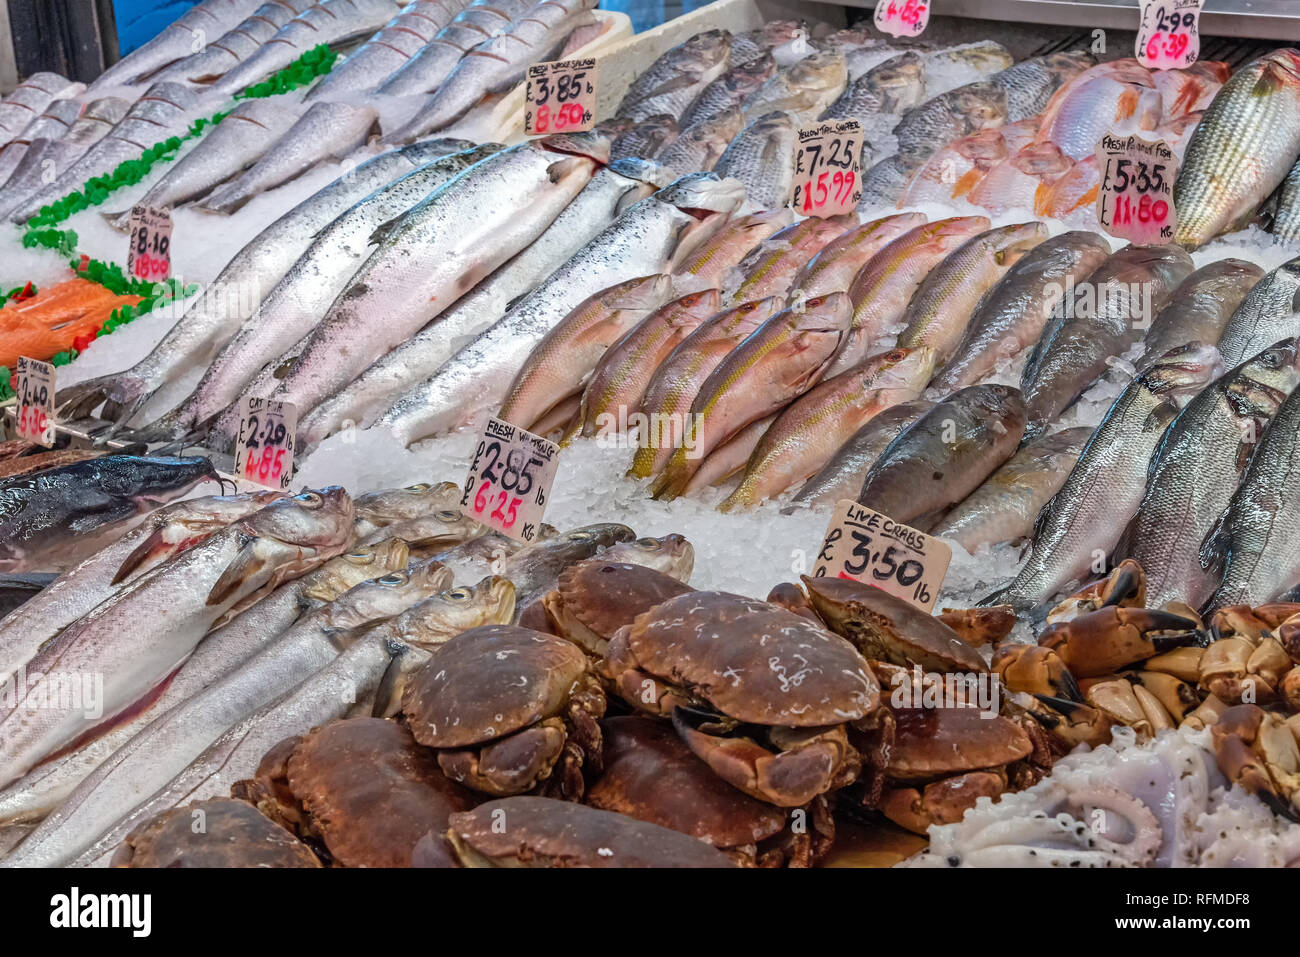 Crayfish and fish for sale at a market in London Stock Photo